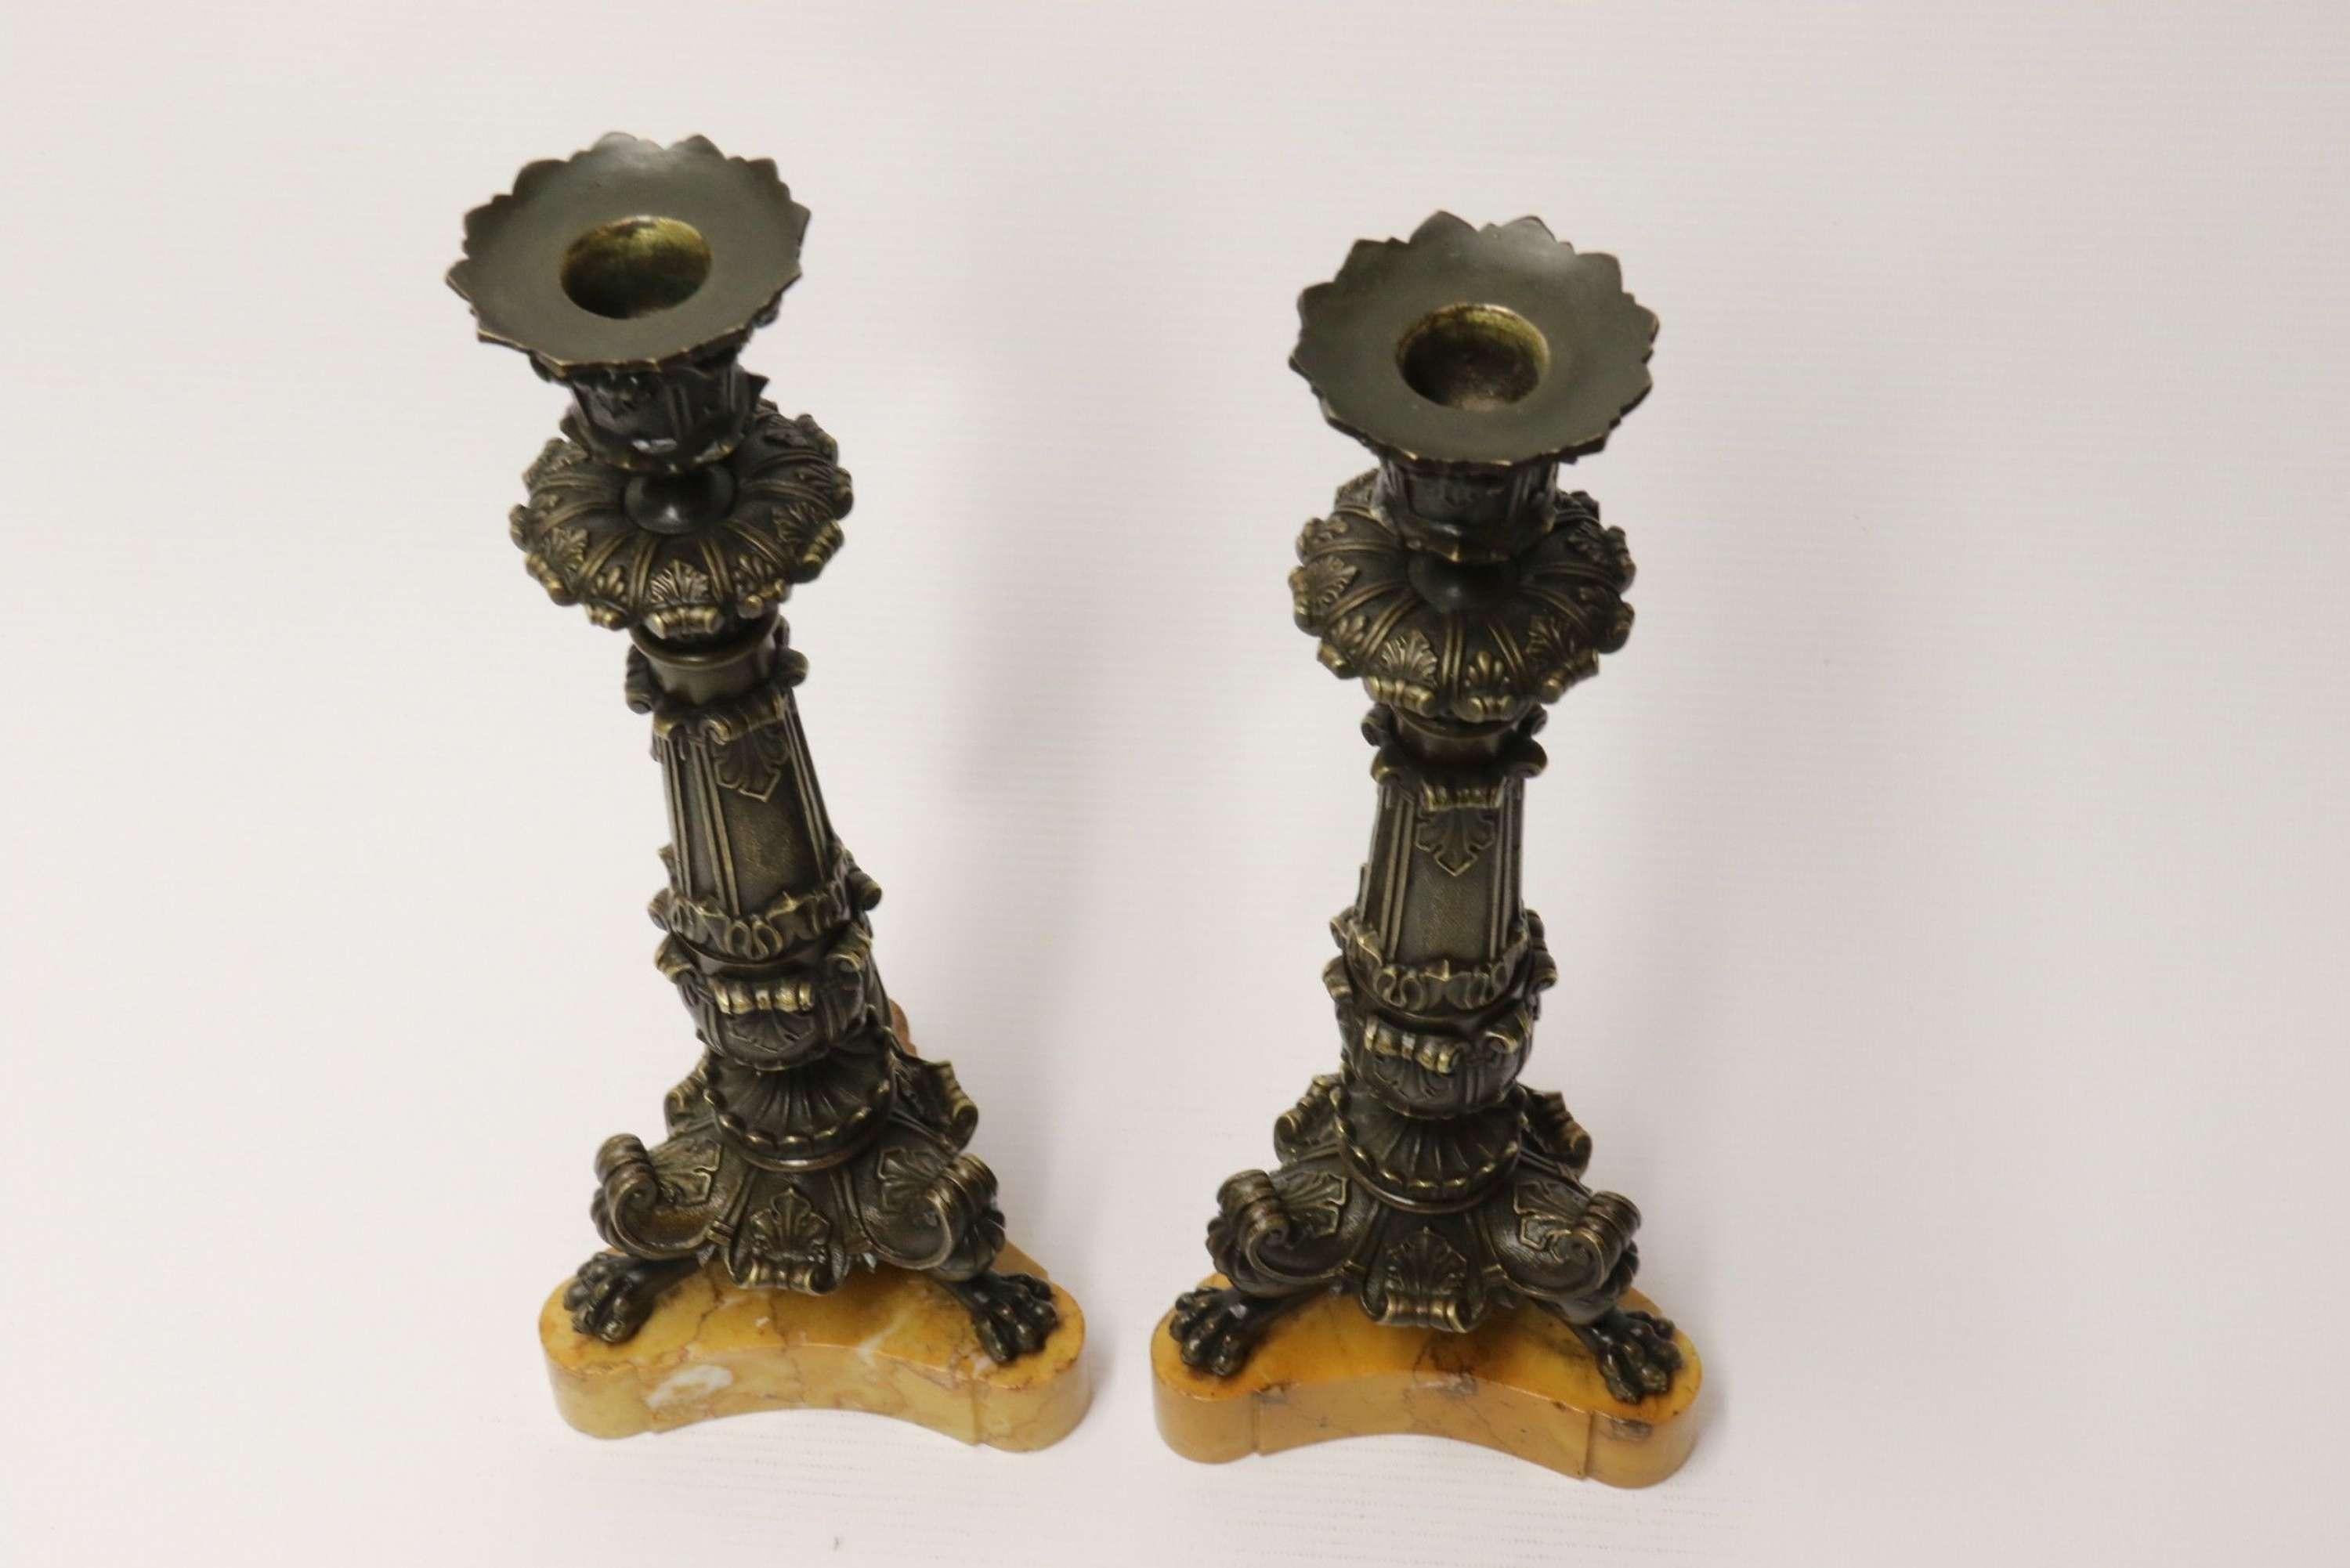 A superb pair of early 19th C French empire bronze candlesticks.

This very fine pair of early 19th century French candlesticks are ornately modelled in the Empire style. They stand raised on shaped and polished sienna marble plinths which are